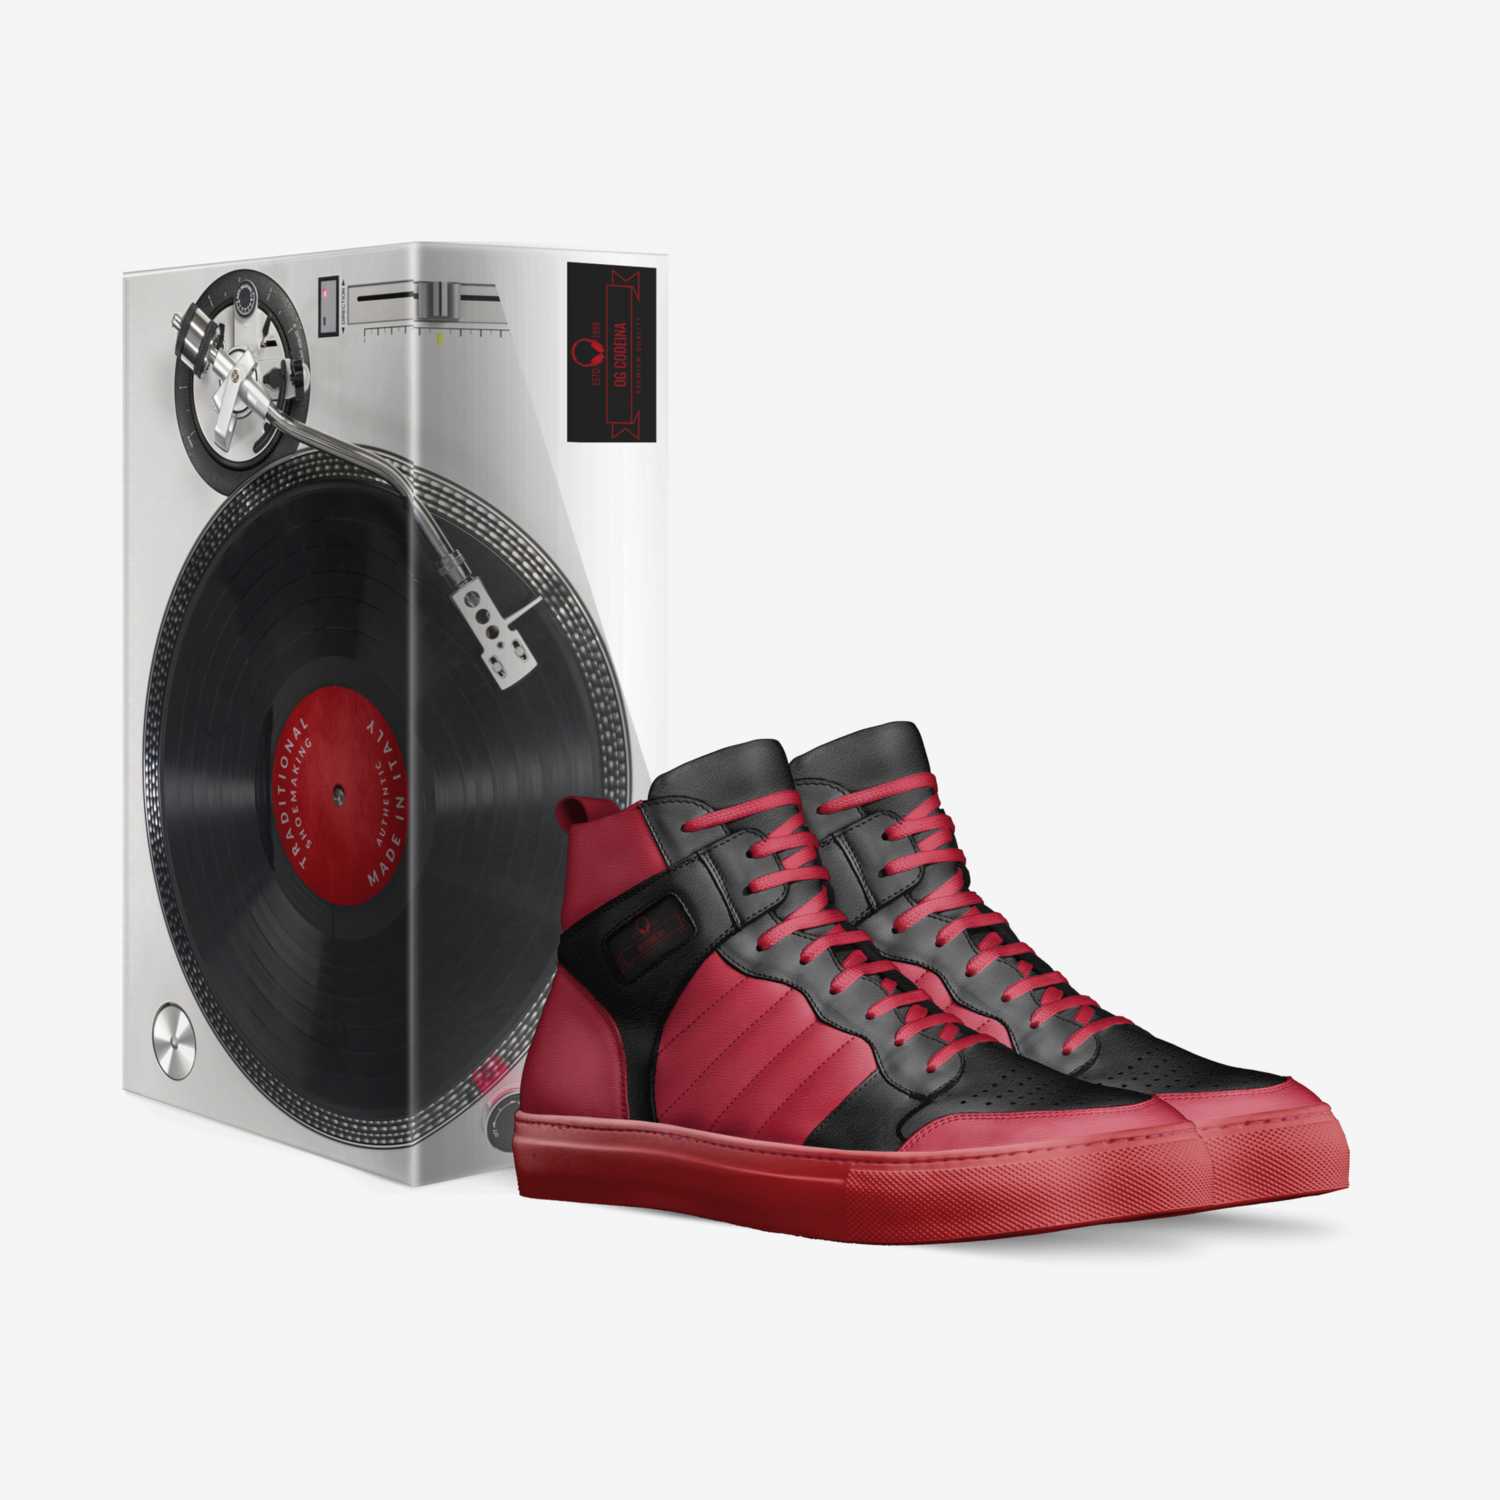 OG CoDeina custom made in Italy shoes by Lawrence Johnson | Box view